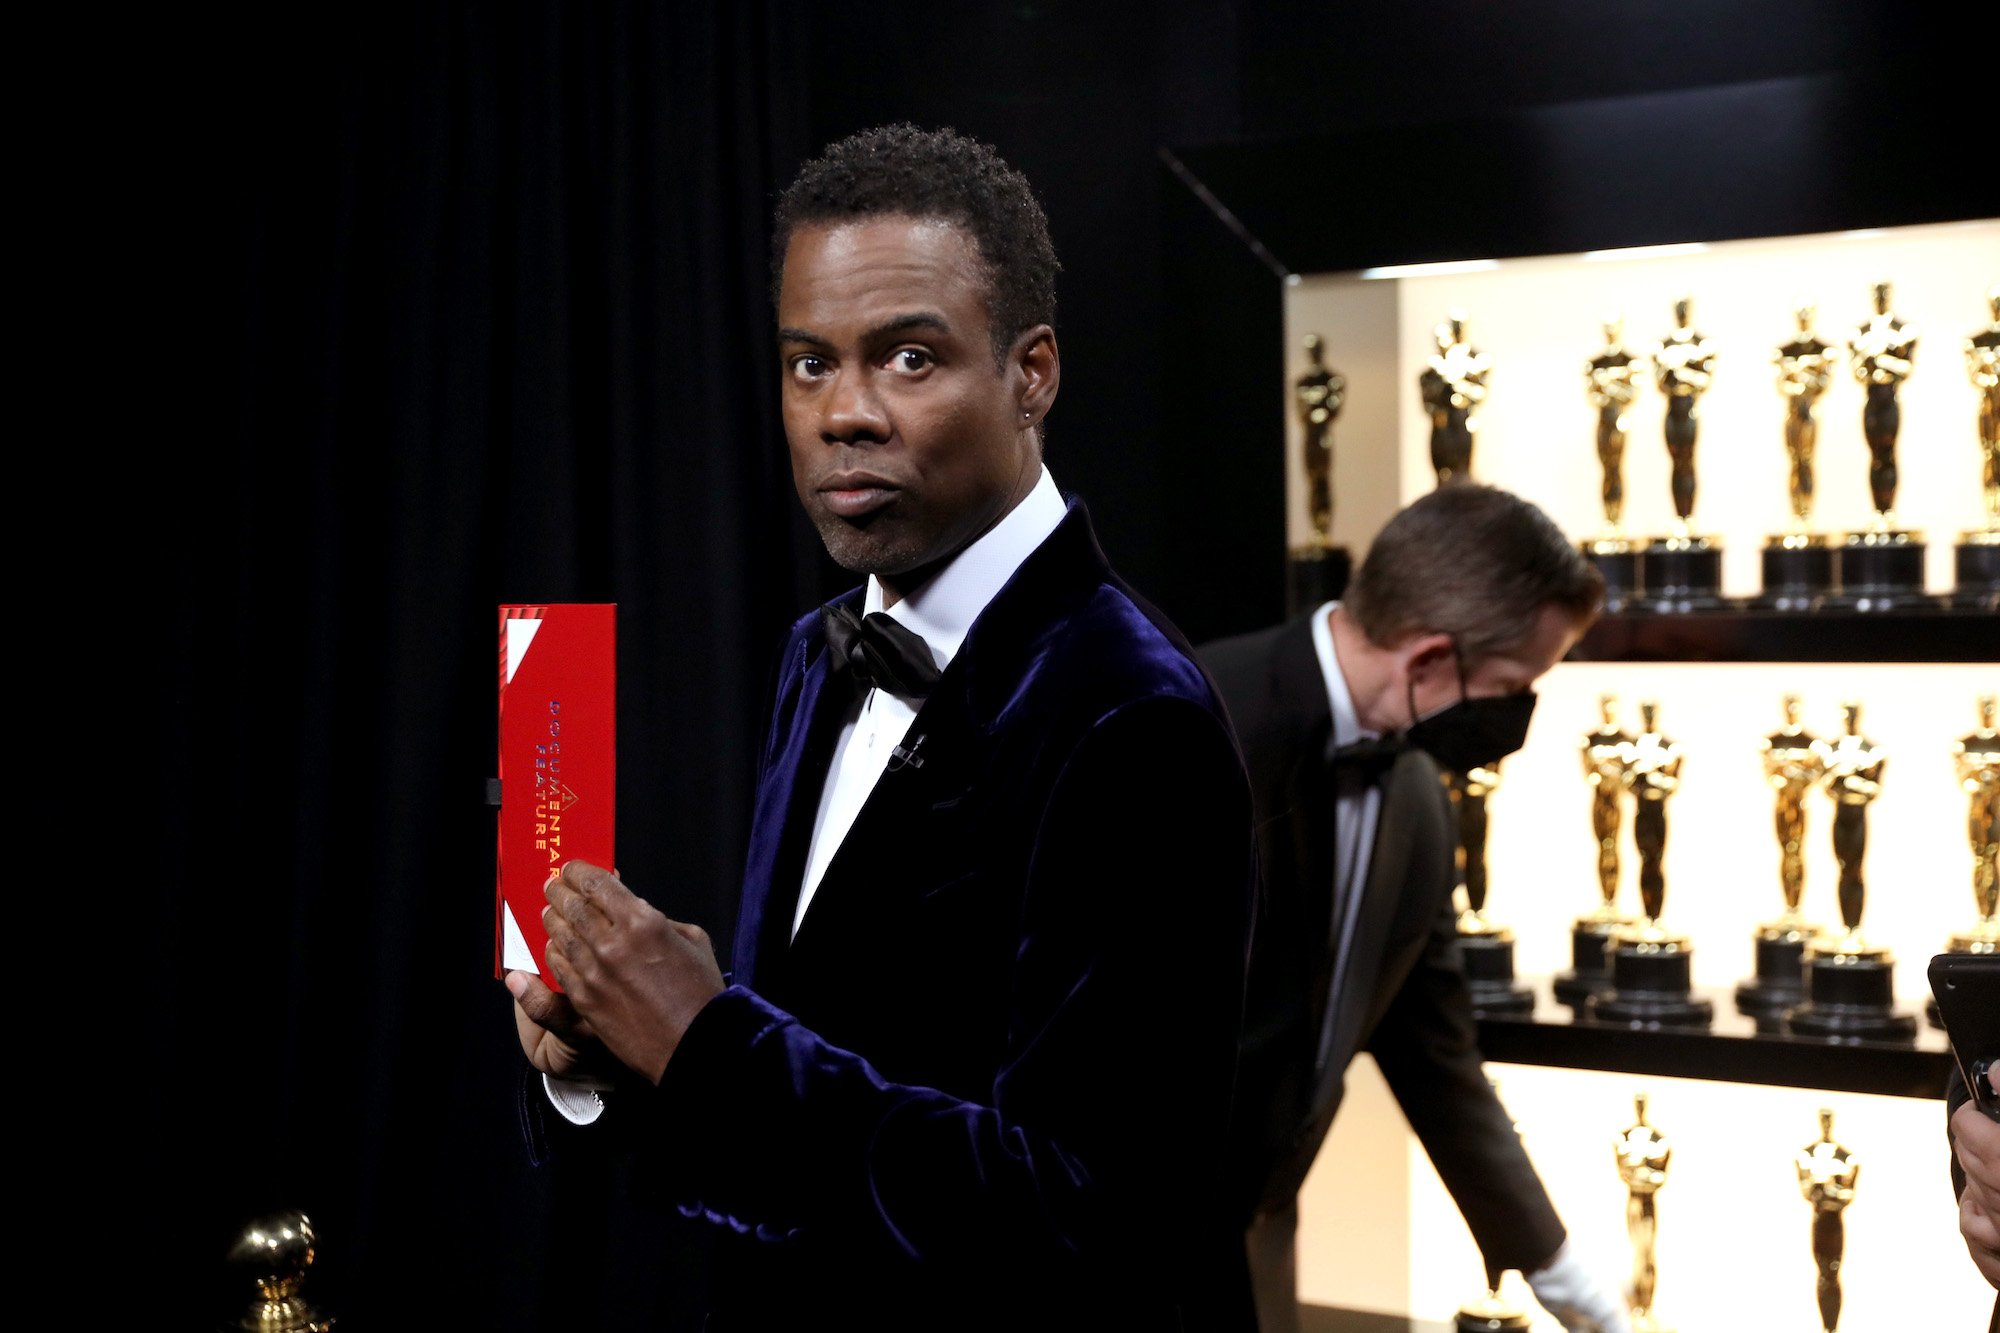 Chris Rock holds the Best Documentary Oscar envelope backstage. Could he host again?